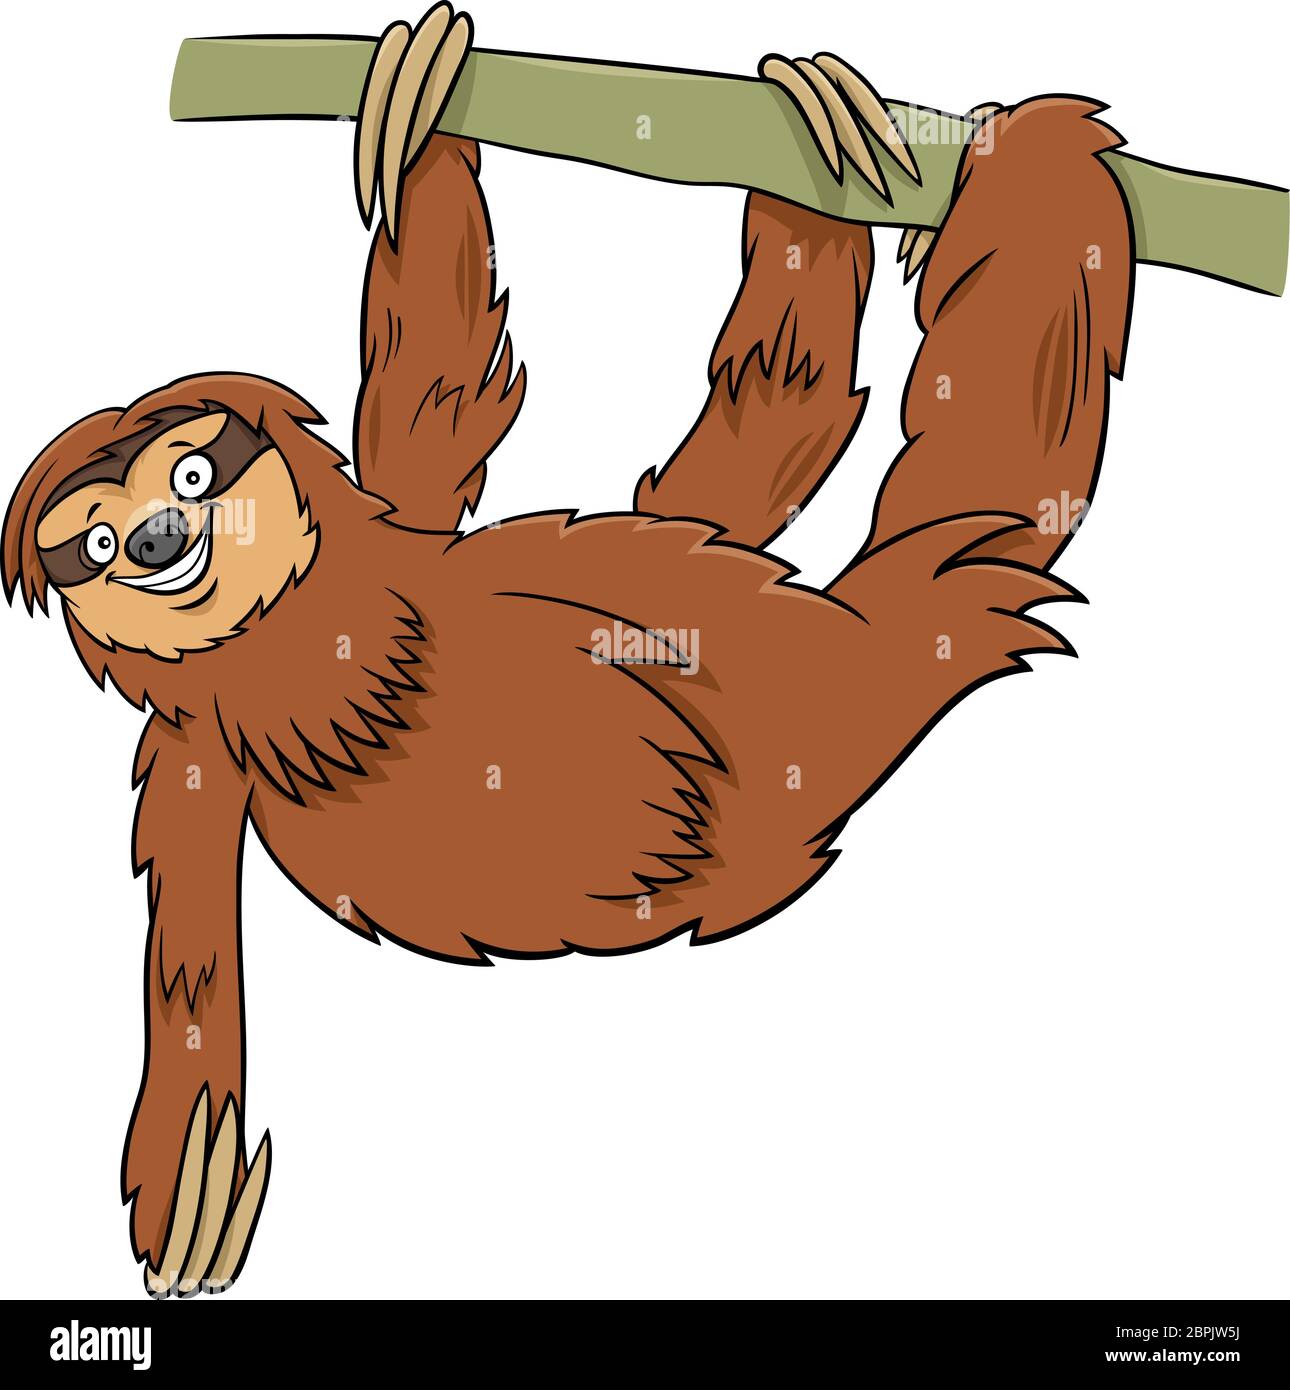 Cartoon Illustration of Sloth Wild Animal Character on the Branch Stock Vector